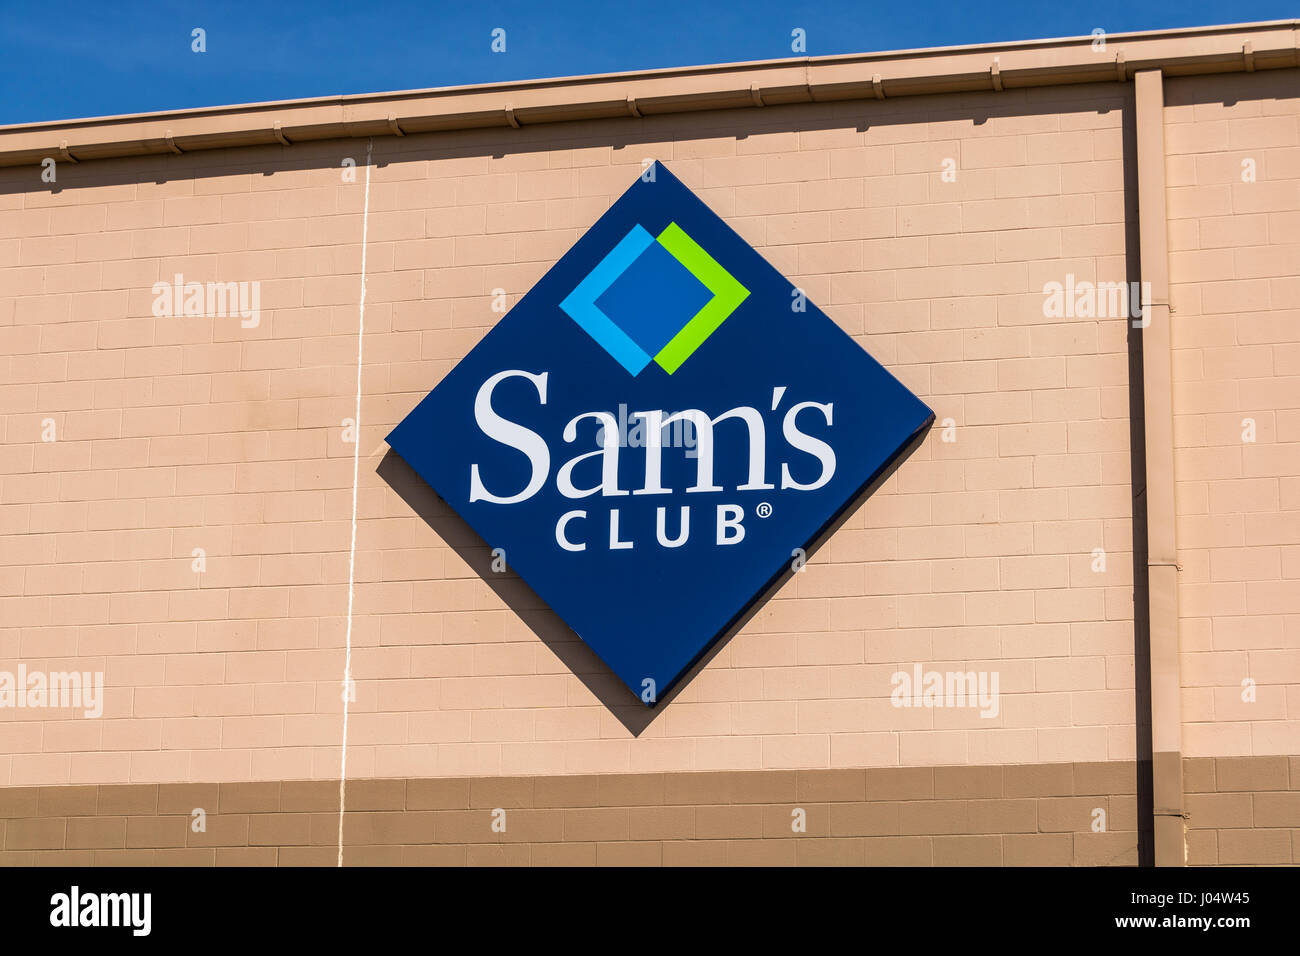 Lafayette - Circa April 2017: Sam's Club Warehouse Logo and Signage. Sam's Club is a chain of membership only stores owned by Walmart III Stock Photo